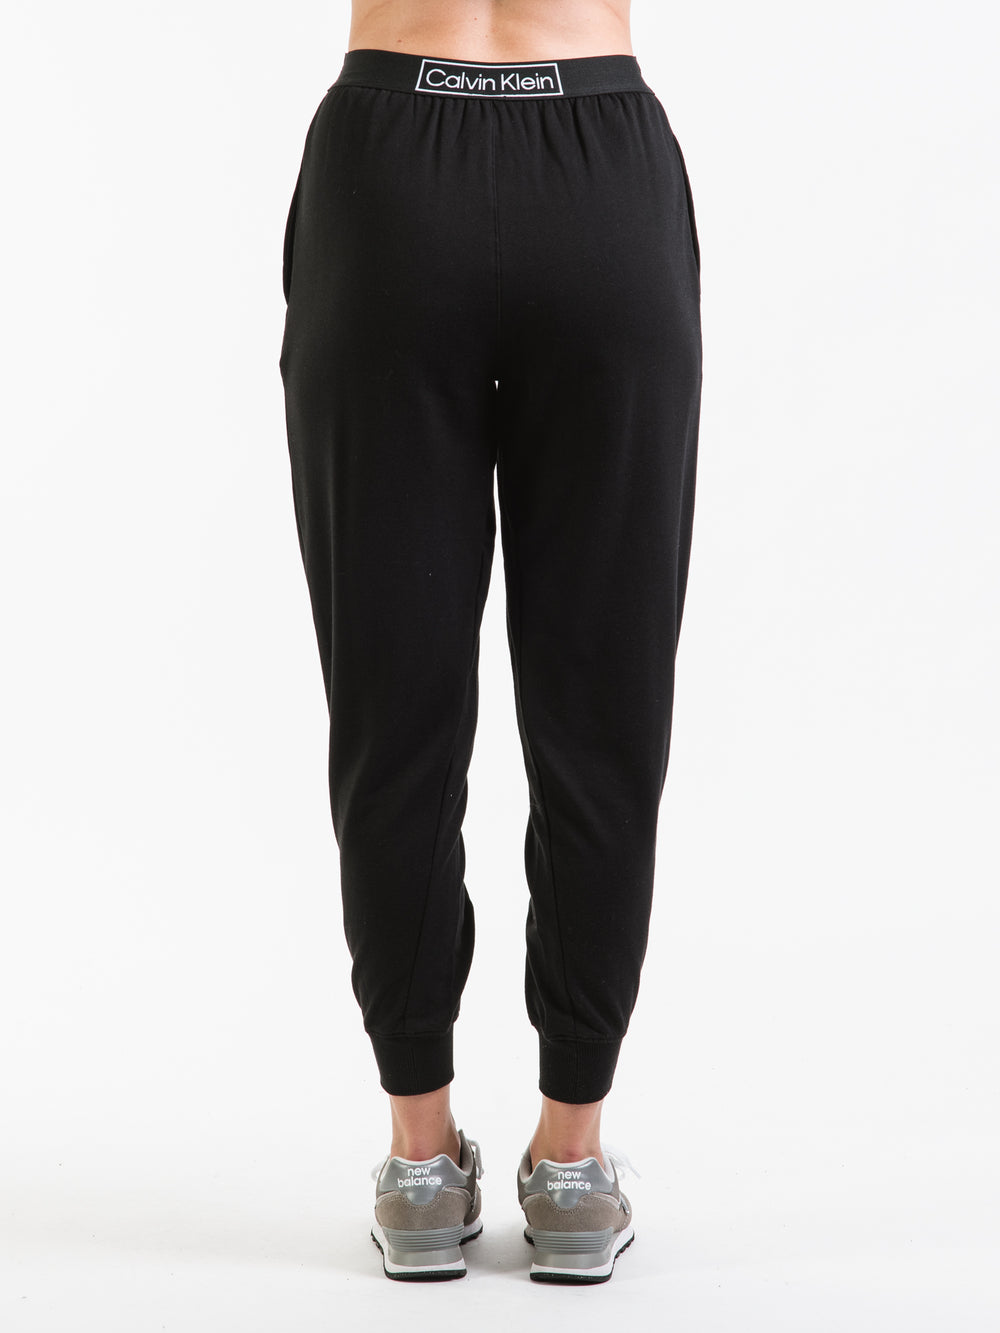 CALVIN KLEIN REIMAGINED JOGGER - CLEARANCE